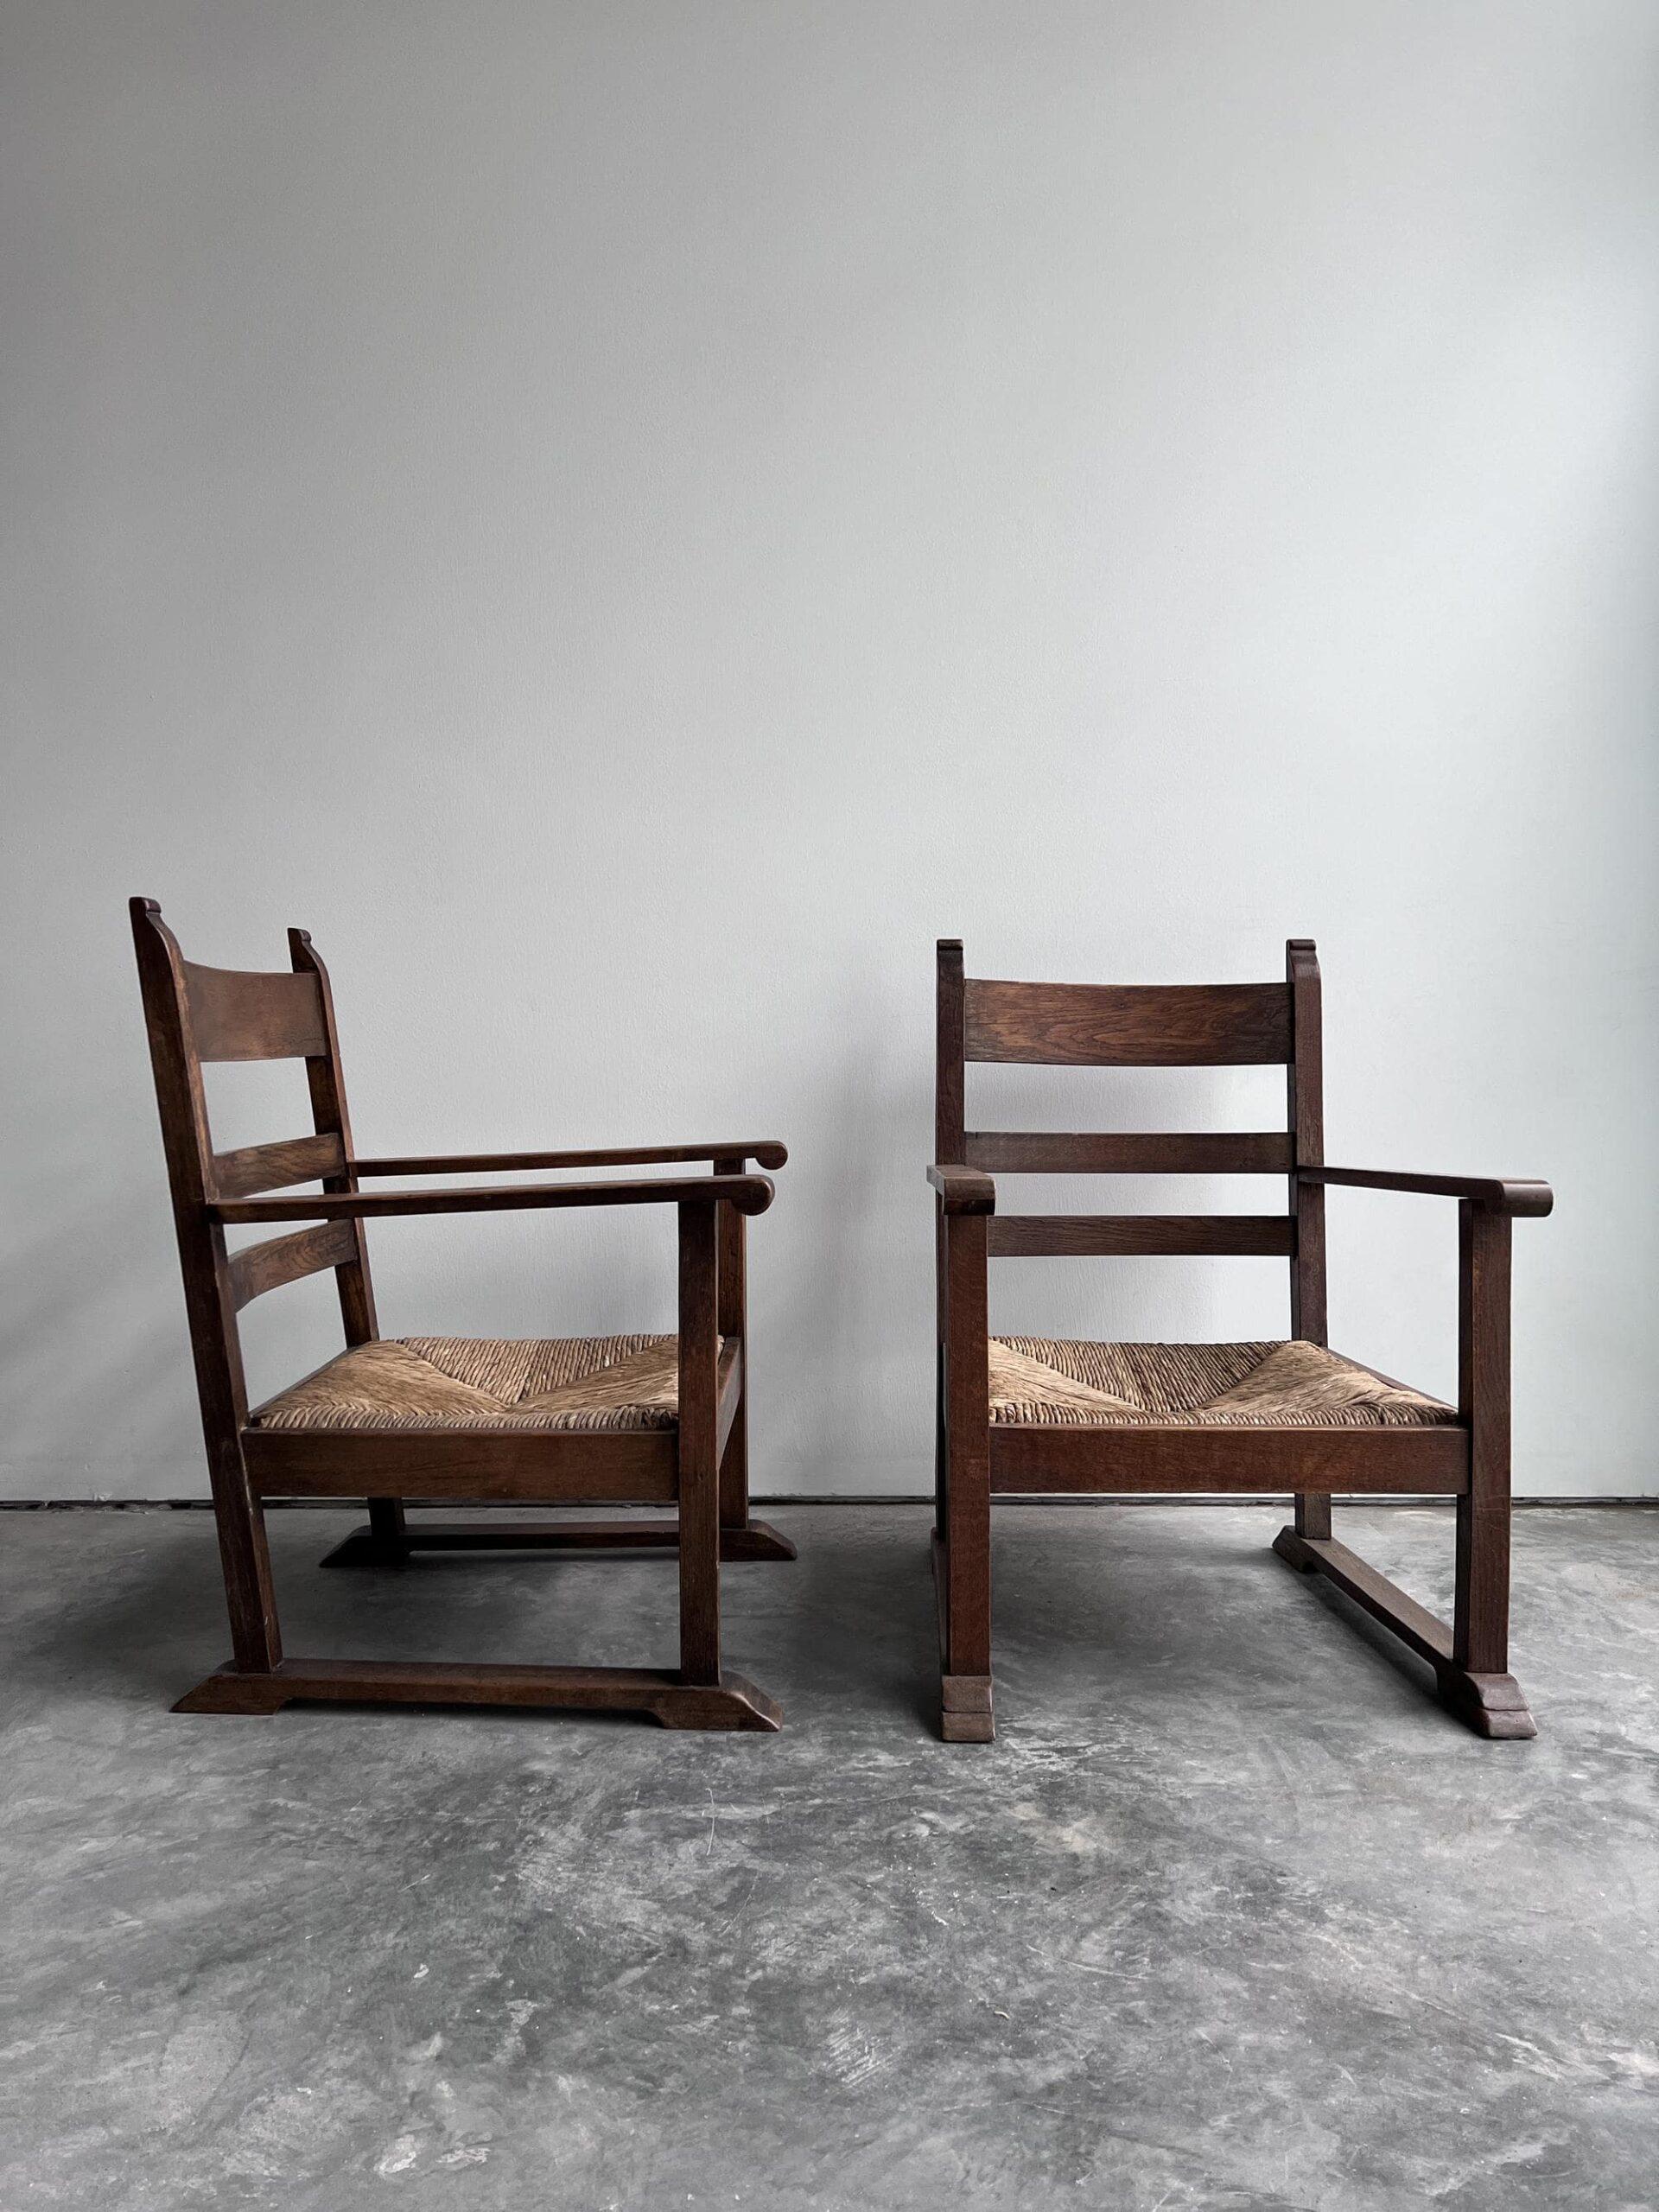 A unique pair of early 20th century Dutch low lounge chairs with original rush seating and solid oak frames. These were most likely intended to be used by the fireplace.